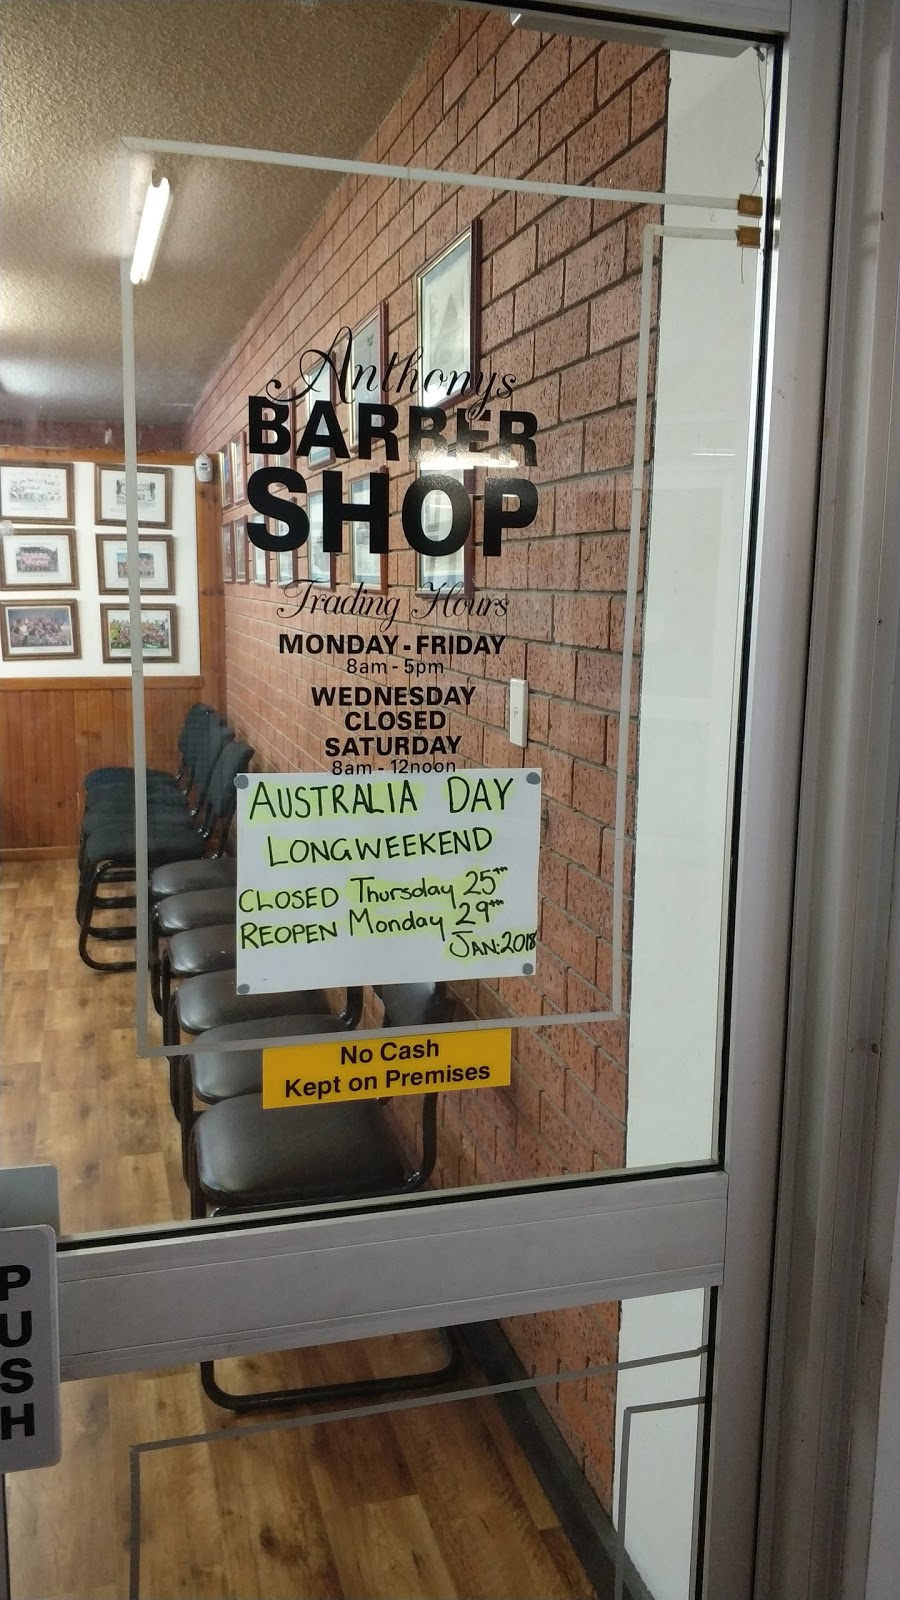 Anthonys Barber Shop | hair care | Shop 3/146 Tongarra Rd, Albion Park NSW 2527, Australia | 0438518602 OR +61 438 518 602